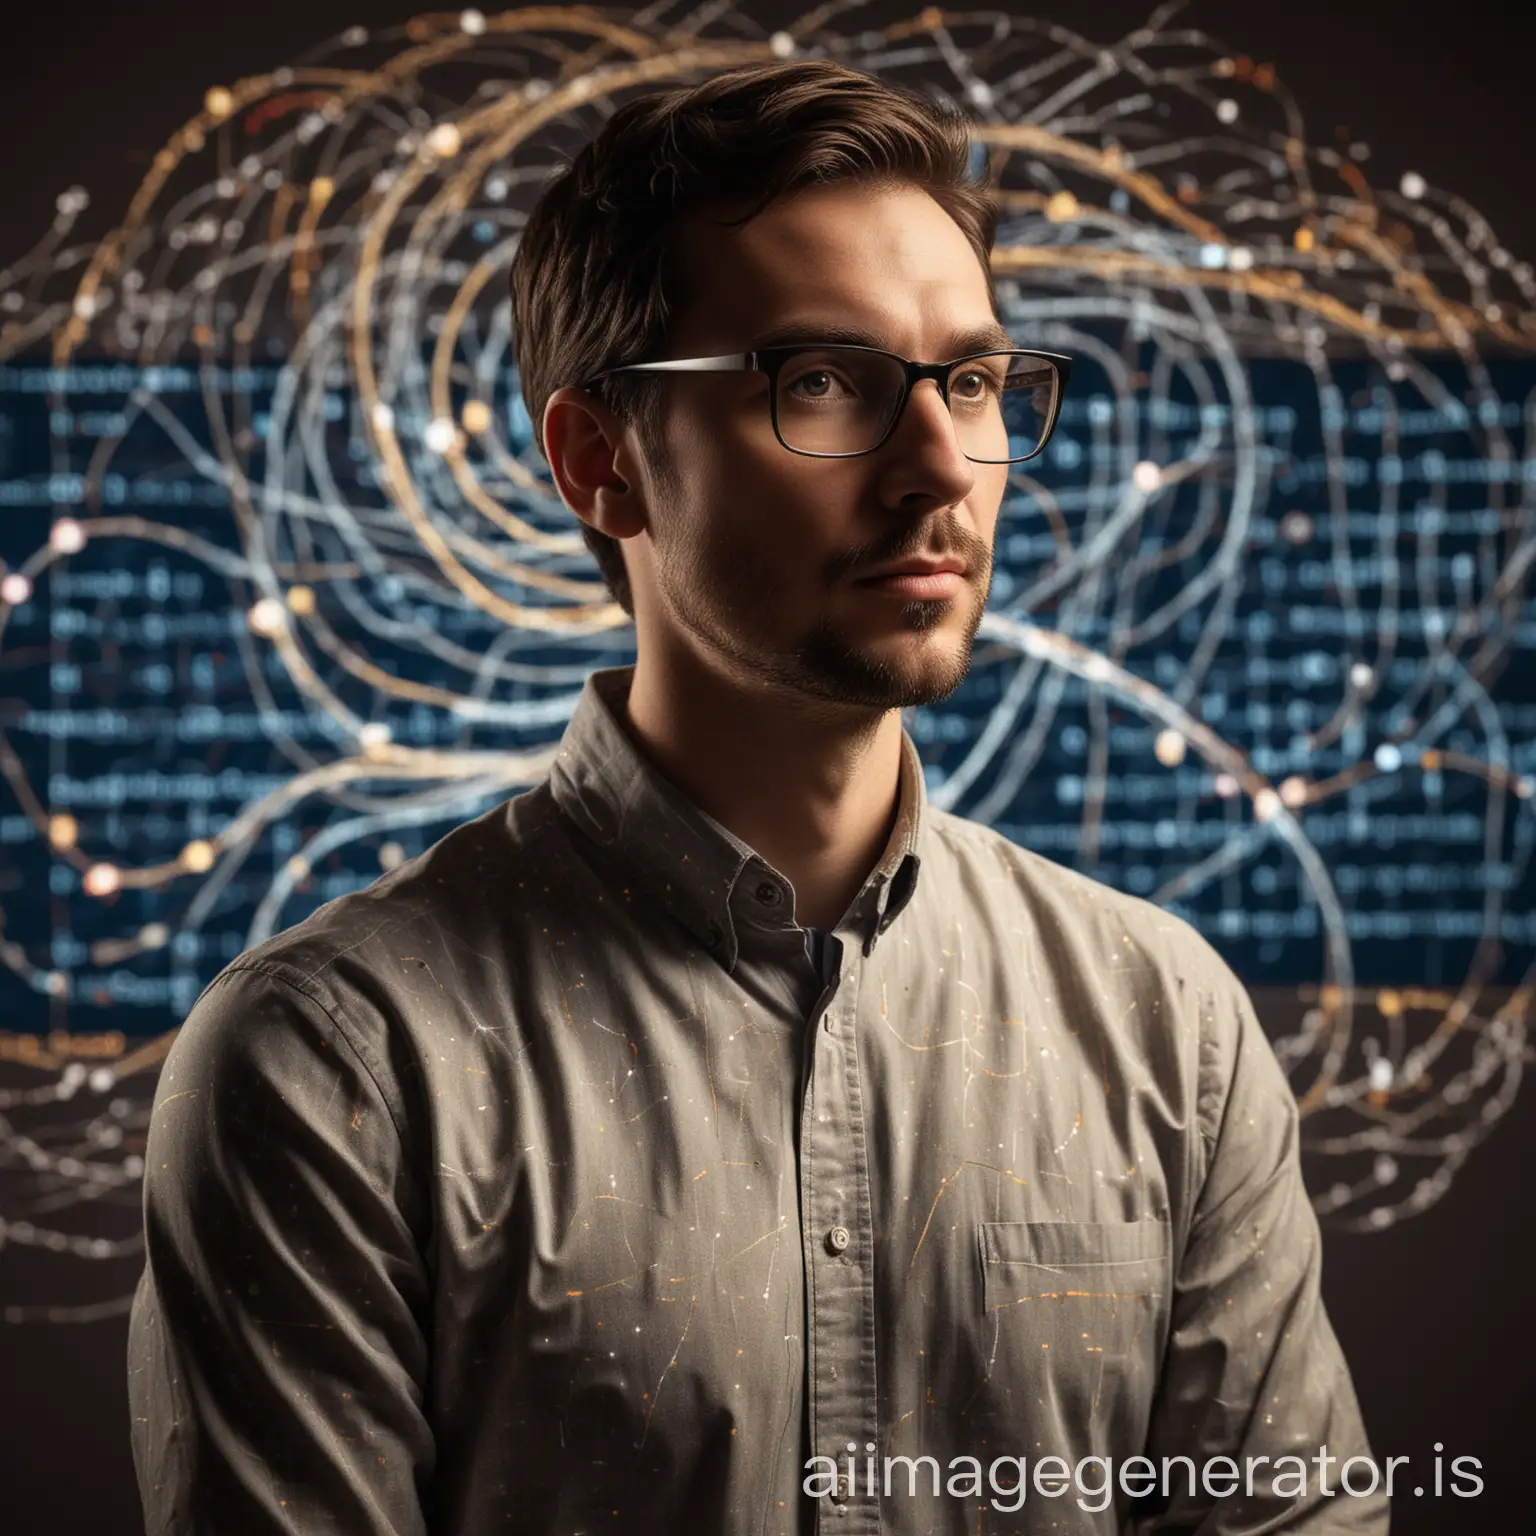 A man data analyst teacher stands confidently in front of a camera, bathed in warm, focused light that accentuates their enthusiasm. Behind them, a mesmerizing design of interconnected data nodes and vibrant visualizations swirls, hinting at the vast potential of data analysis.